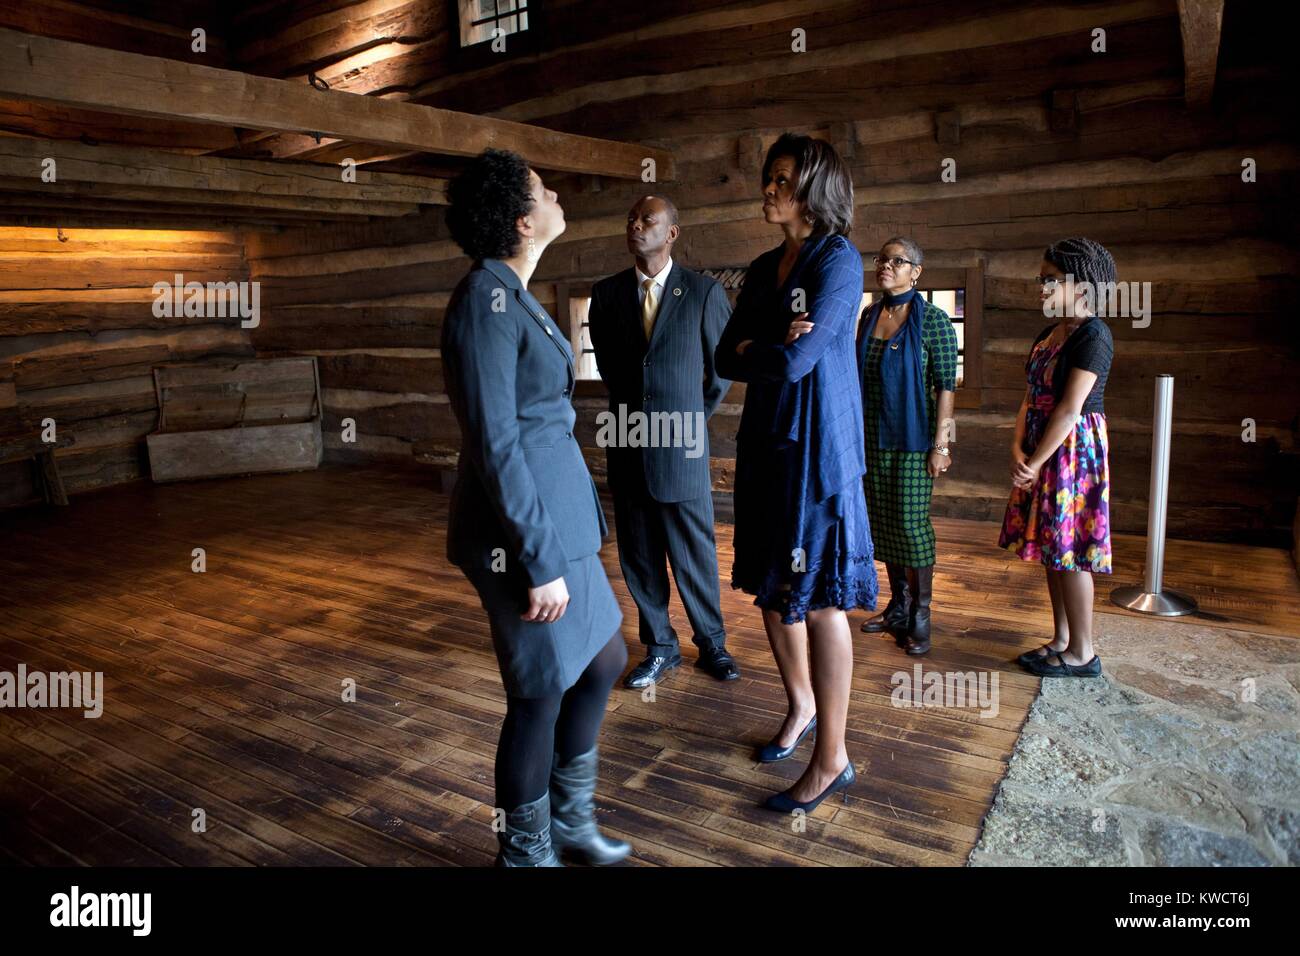 First Lady Michelle Obama in the Slave Pen exhibit at National Underground Railroad Freedom Center. Cincinnati, Ohio, Feb. 23, 2012. Built in the early 1800s, the holding pen of Kentucky slave trader, Capt. John W. Anderson. It was used to hold enslaved people to be sold south in the internal slave trade in America. (BSLOC 2015 3 79) Stock Photo